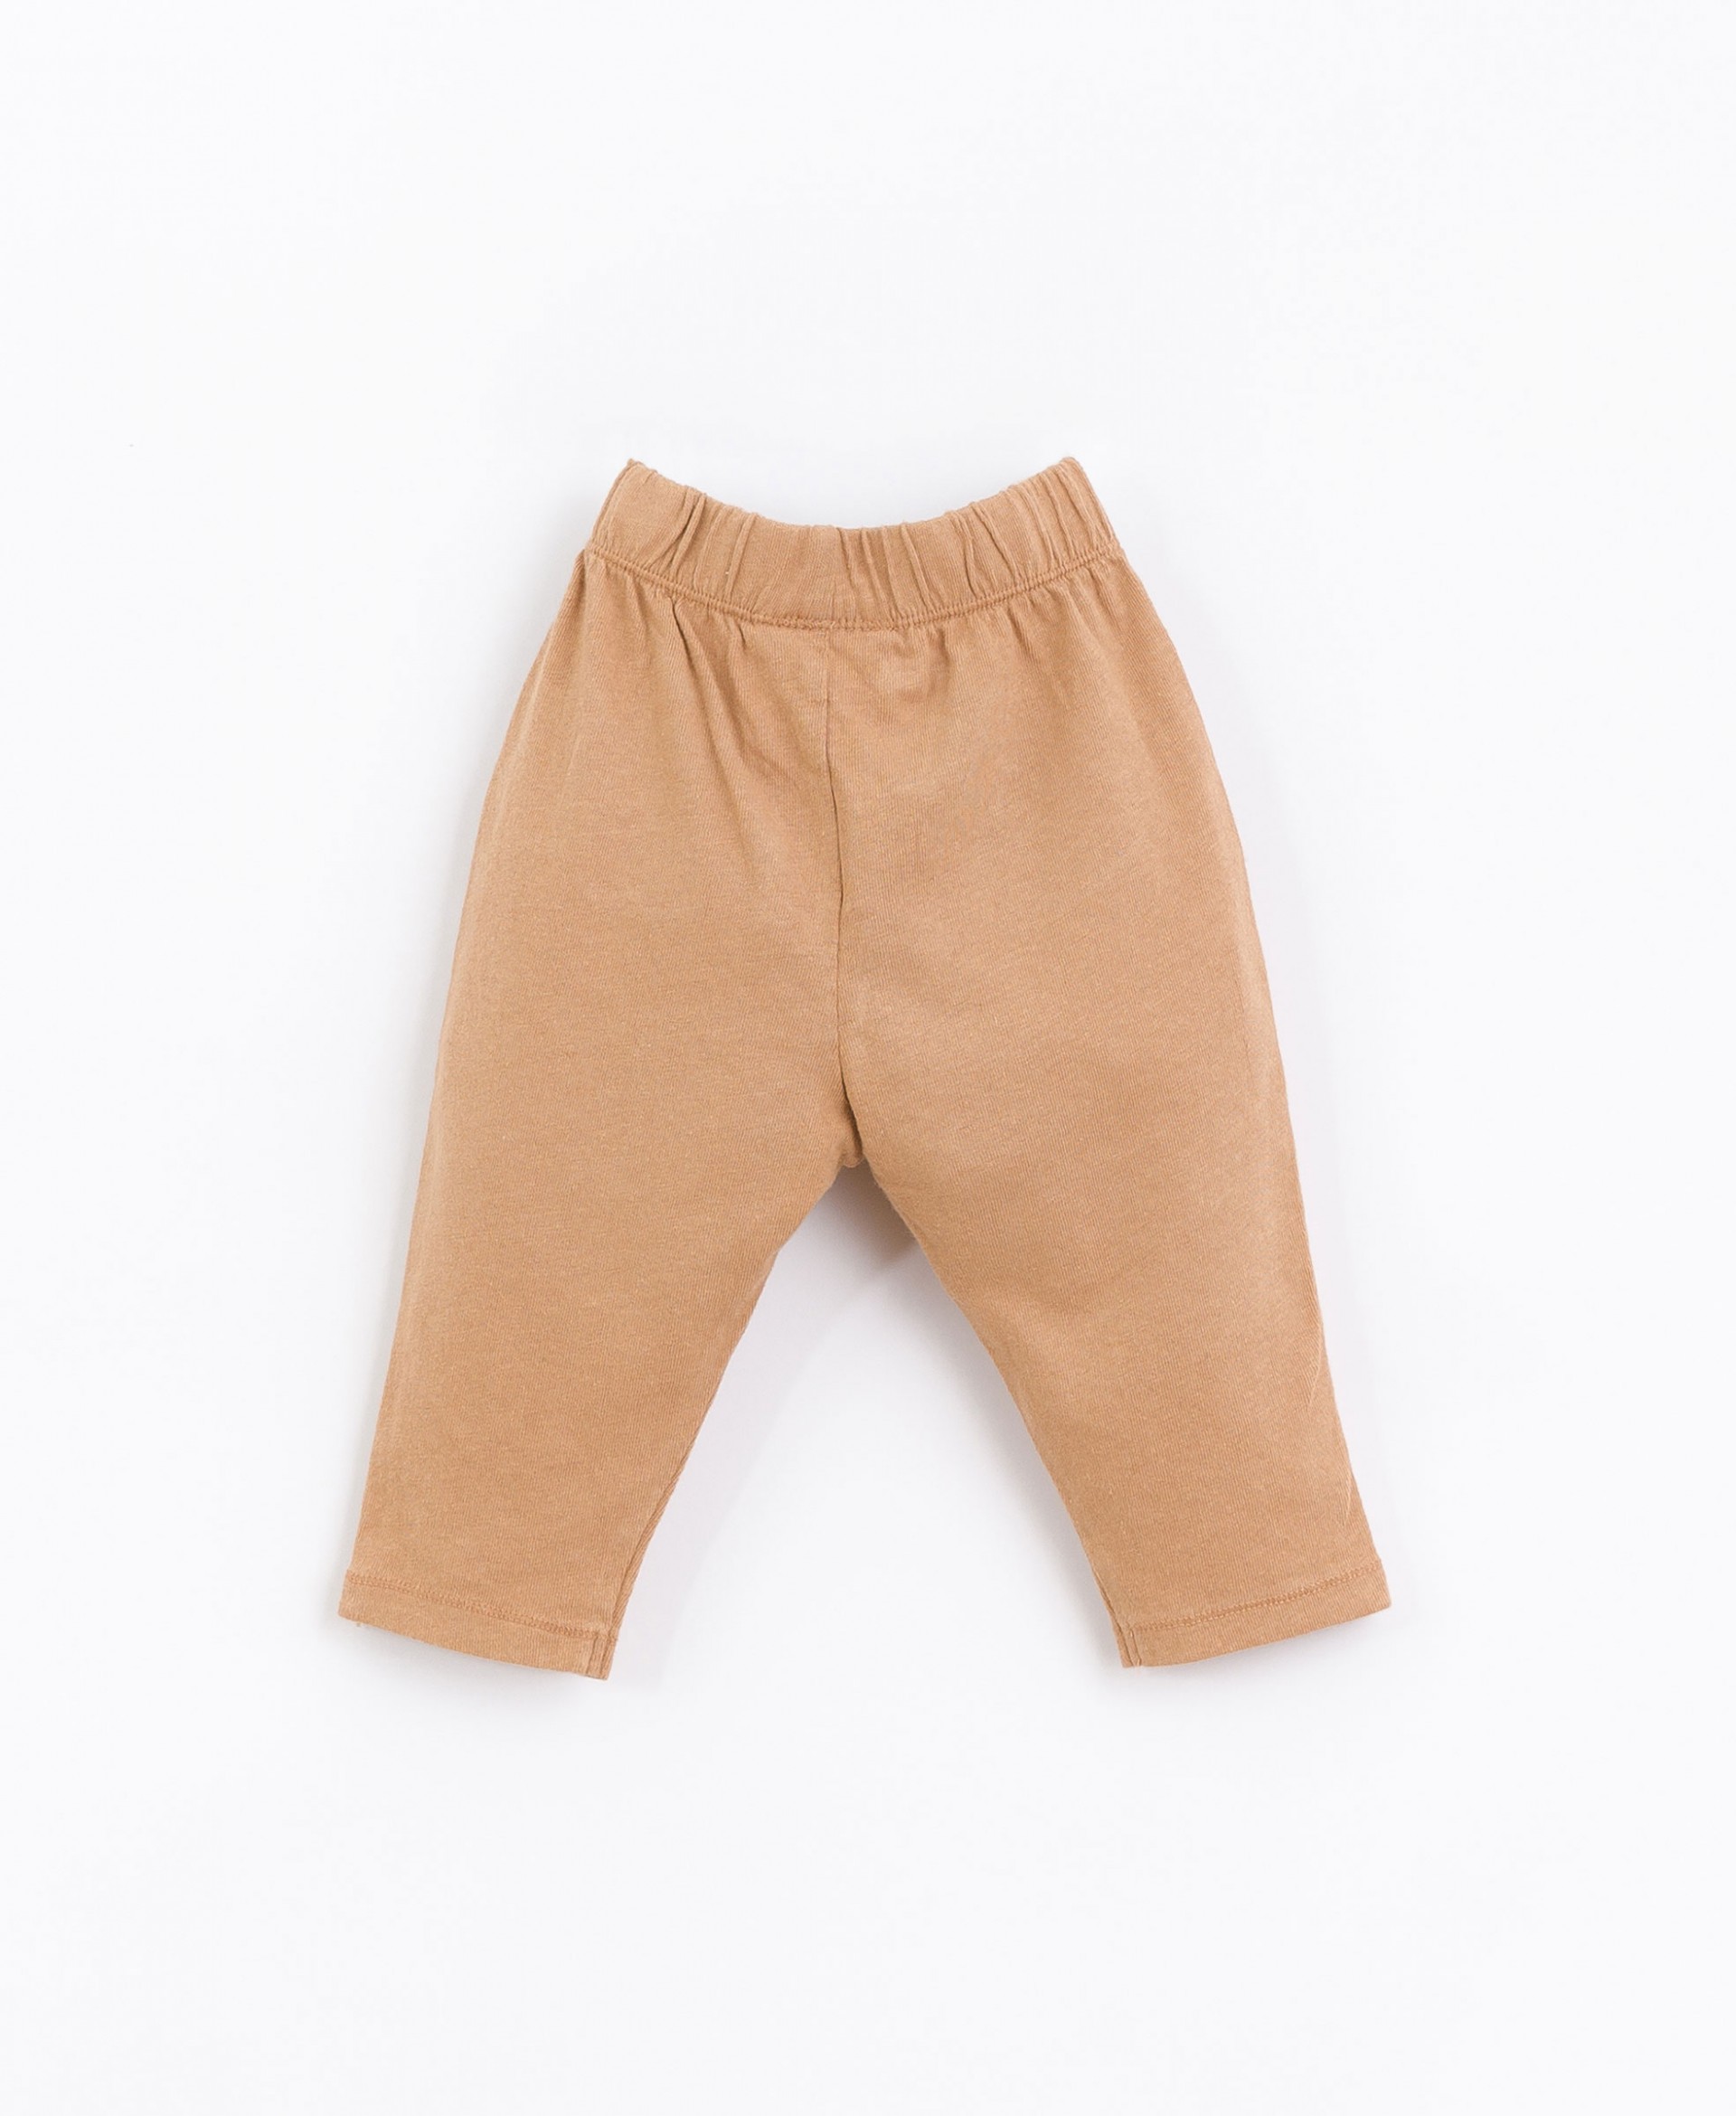 Pants with front pockets | Basketry